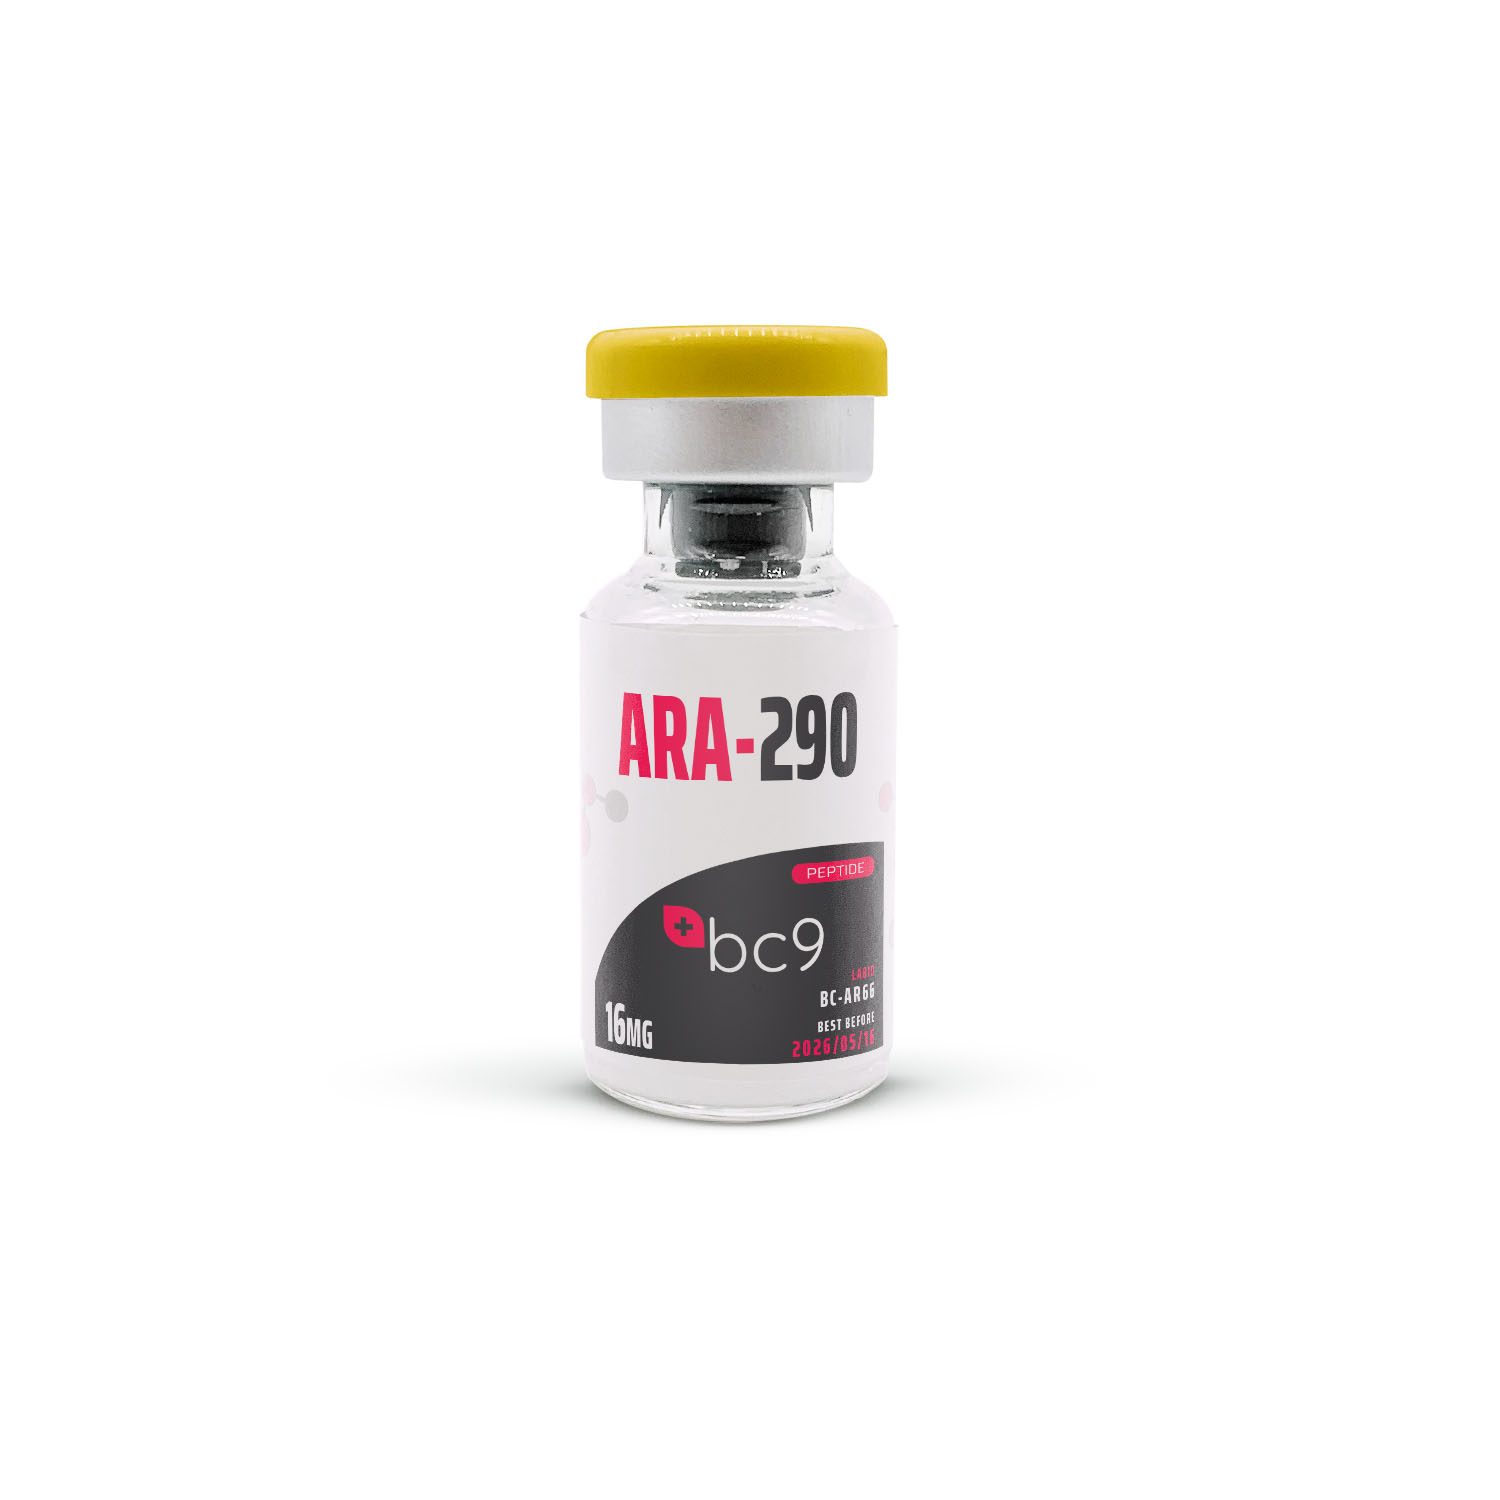 ARA-290 Peptide for Sale | Fast Shipping | BC9.org